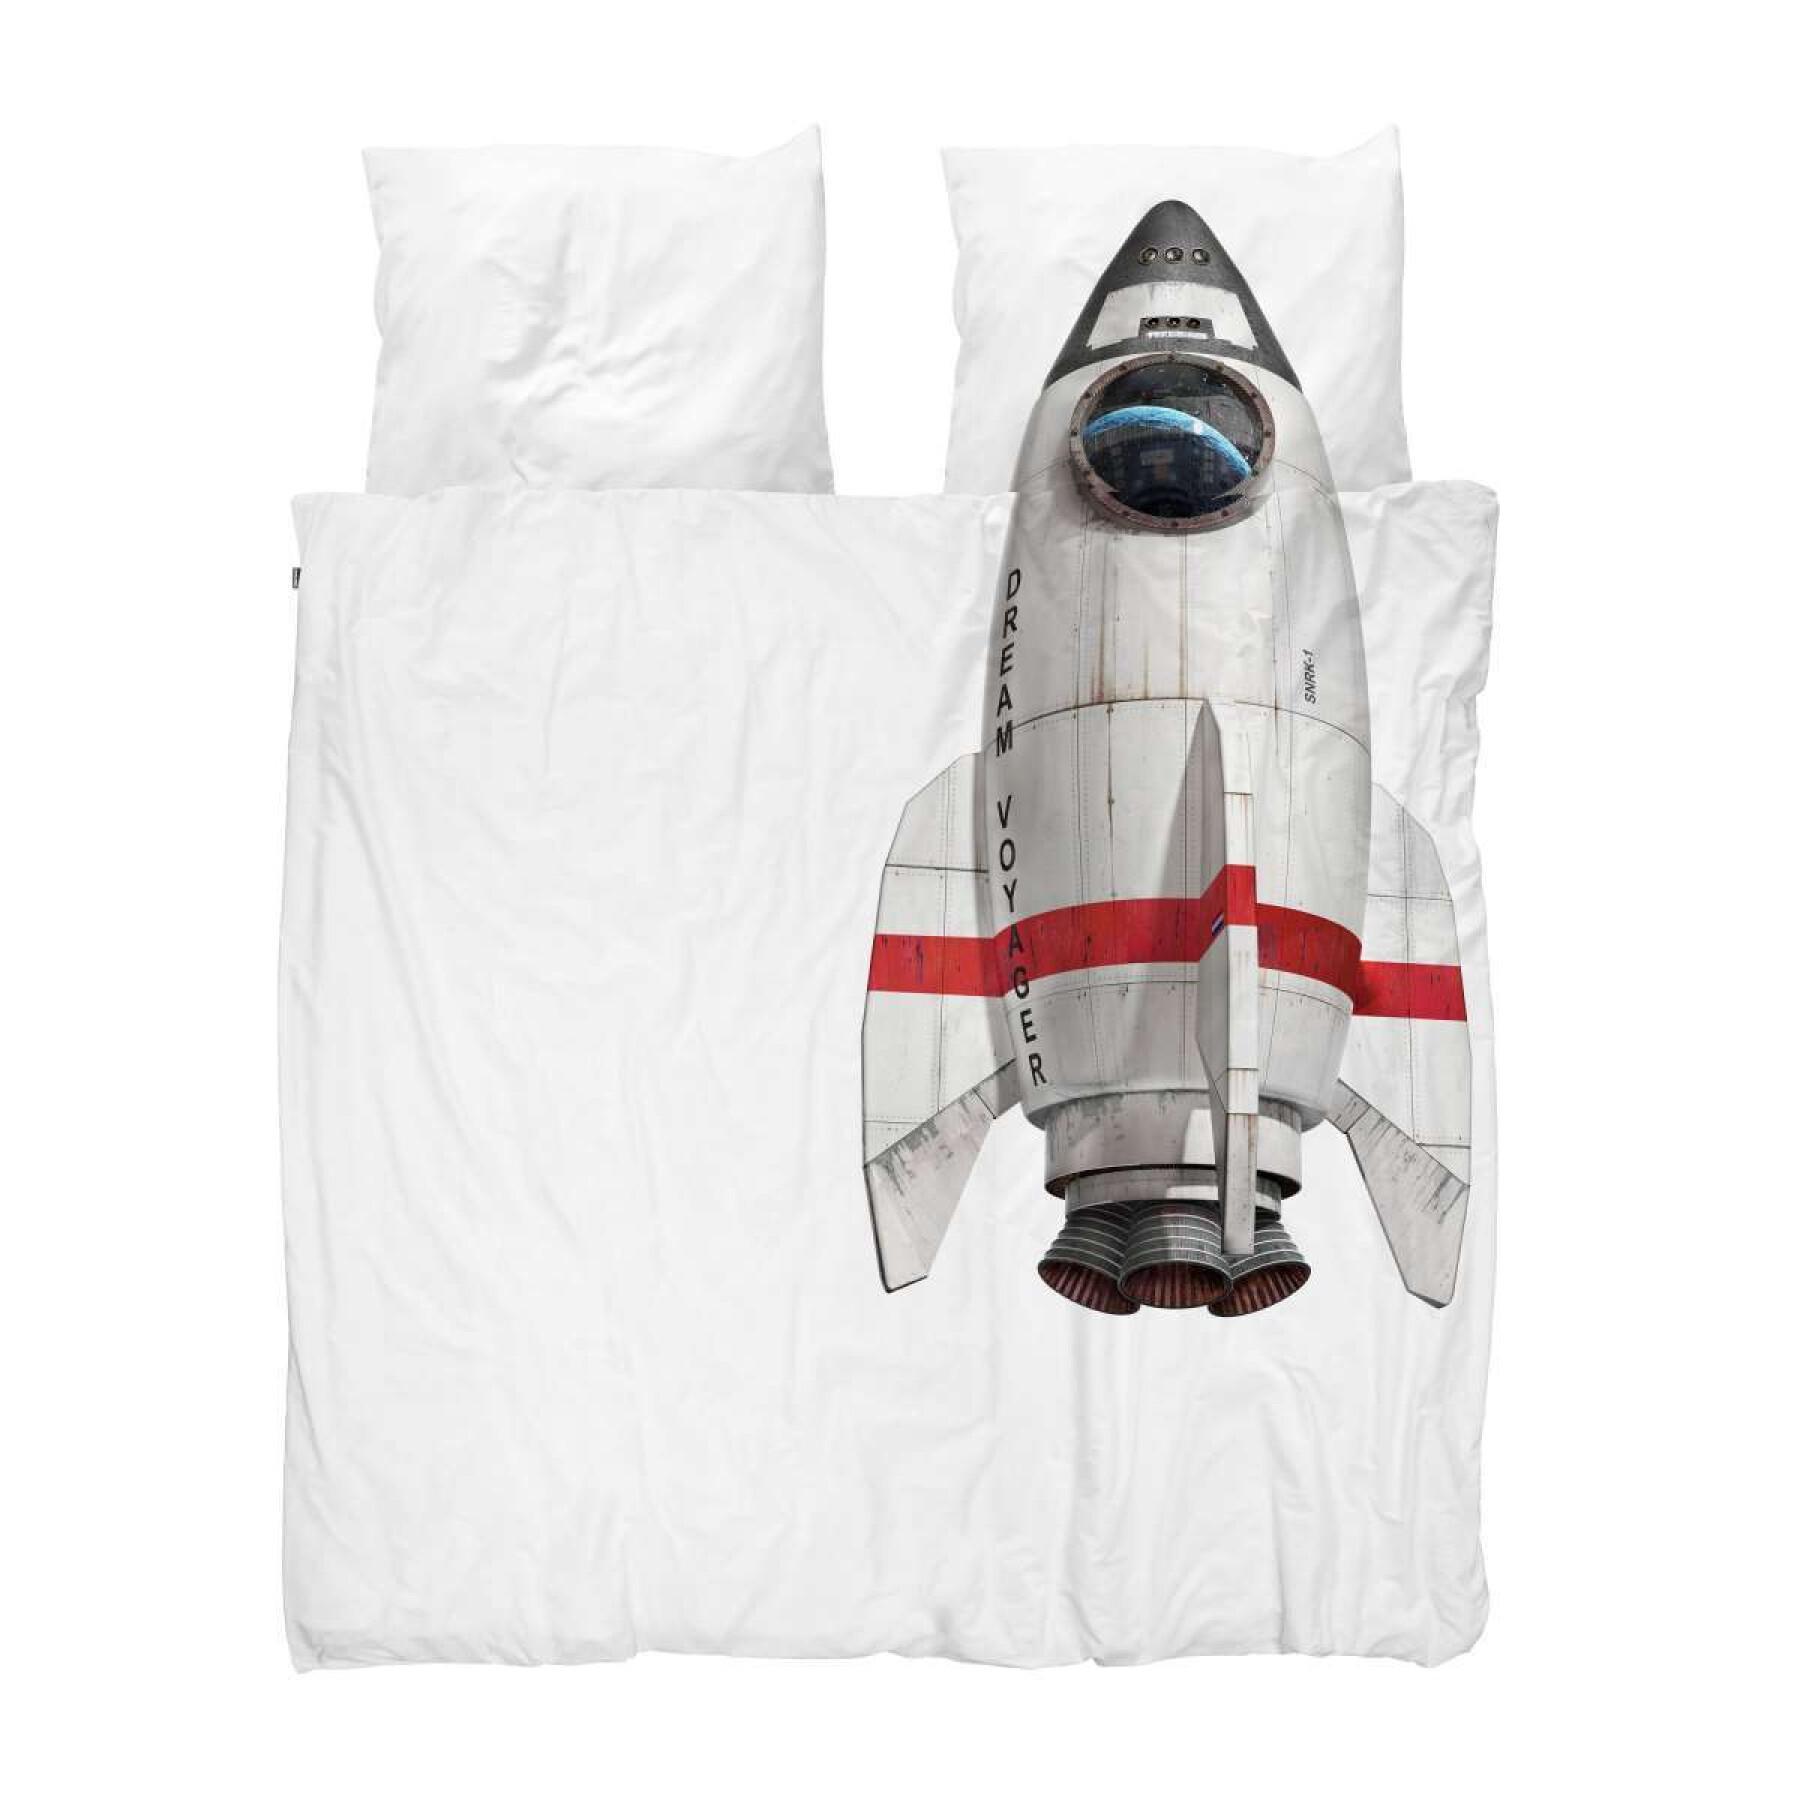 Comforter cover and pillowcase for children Snurk Rocket